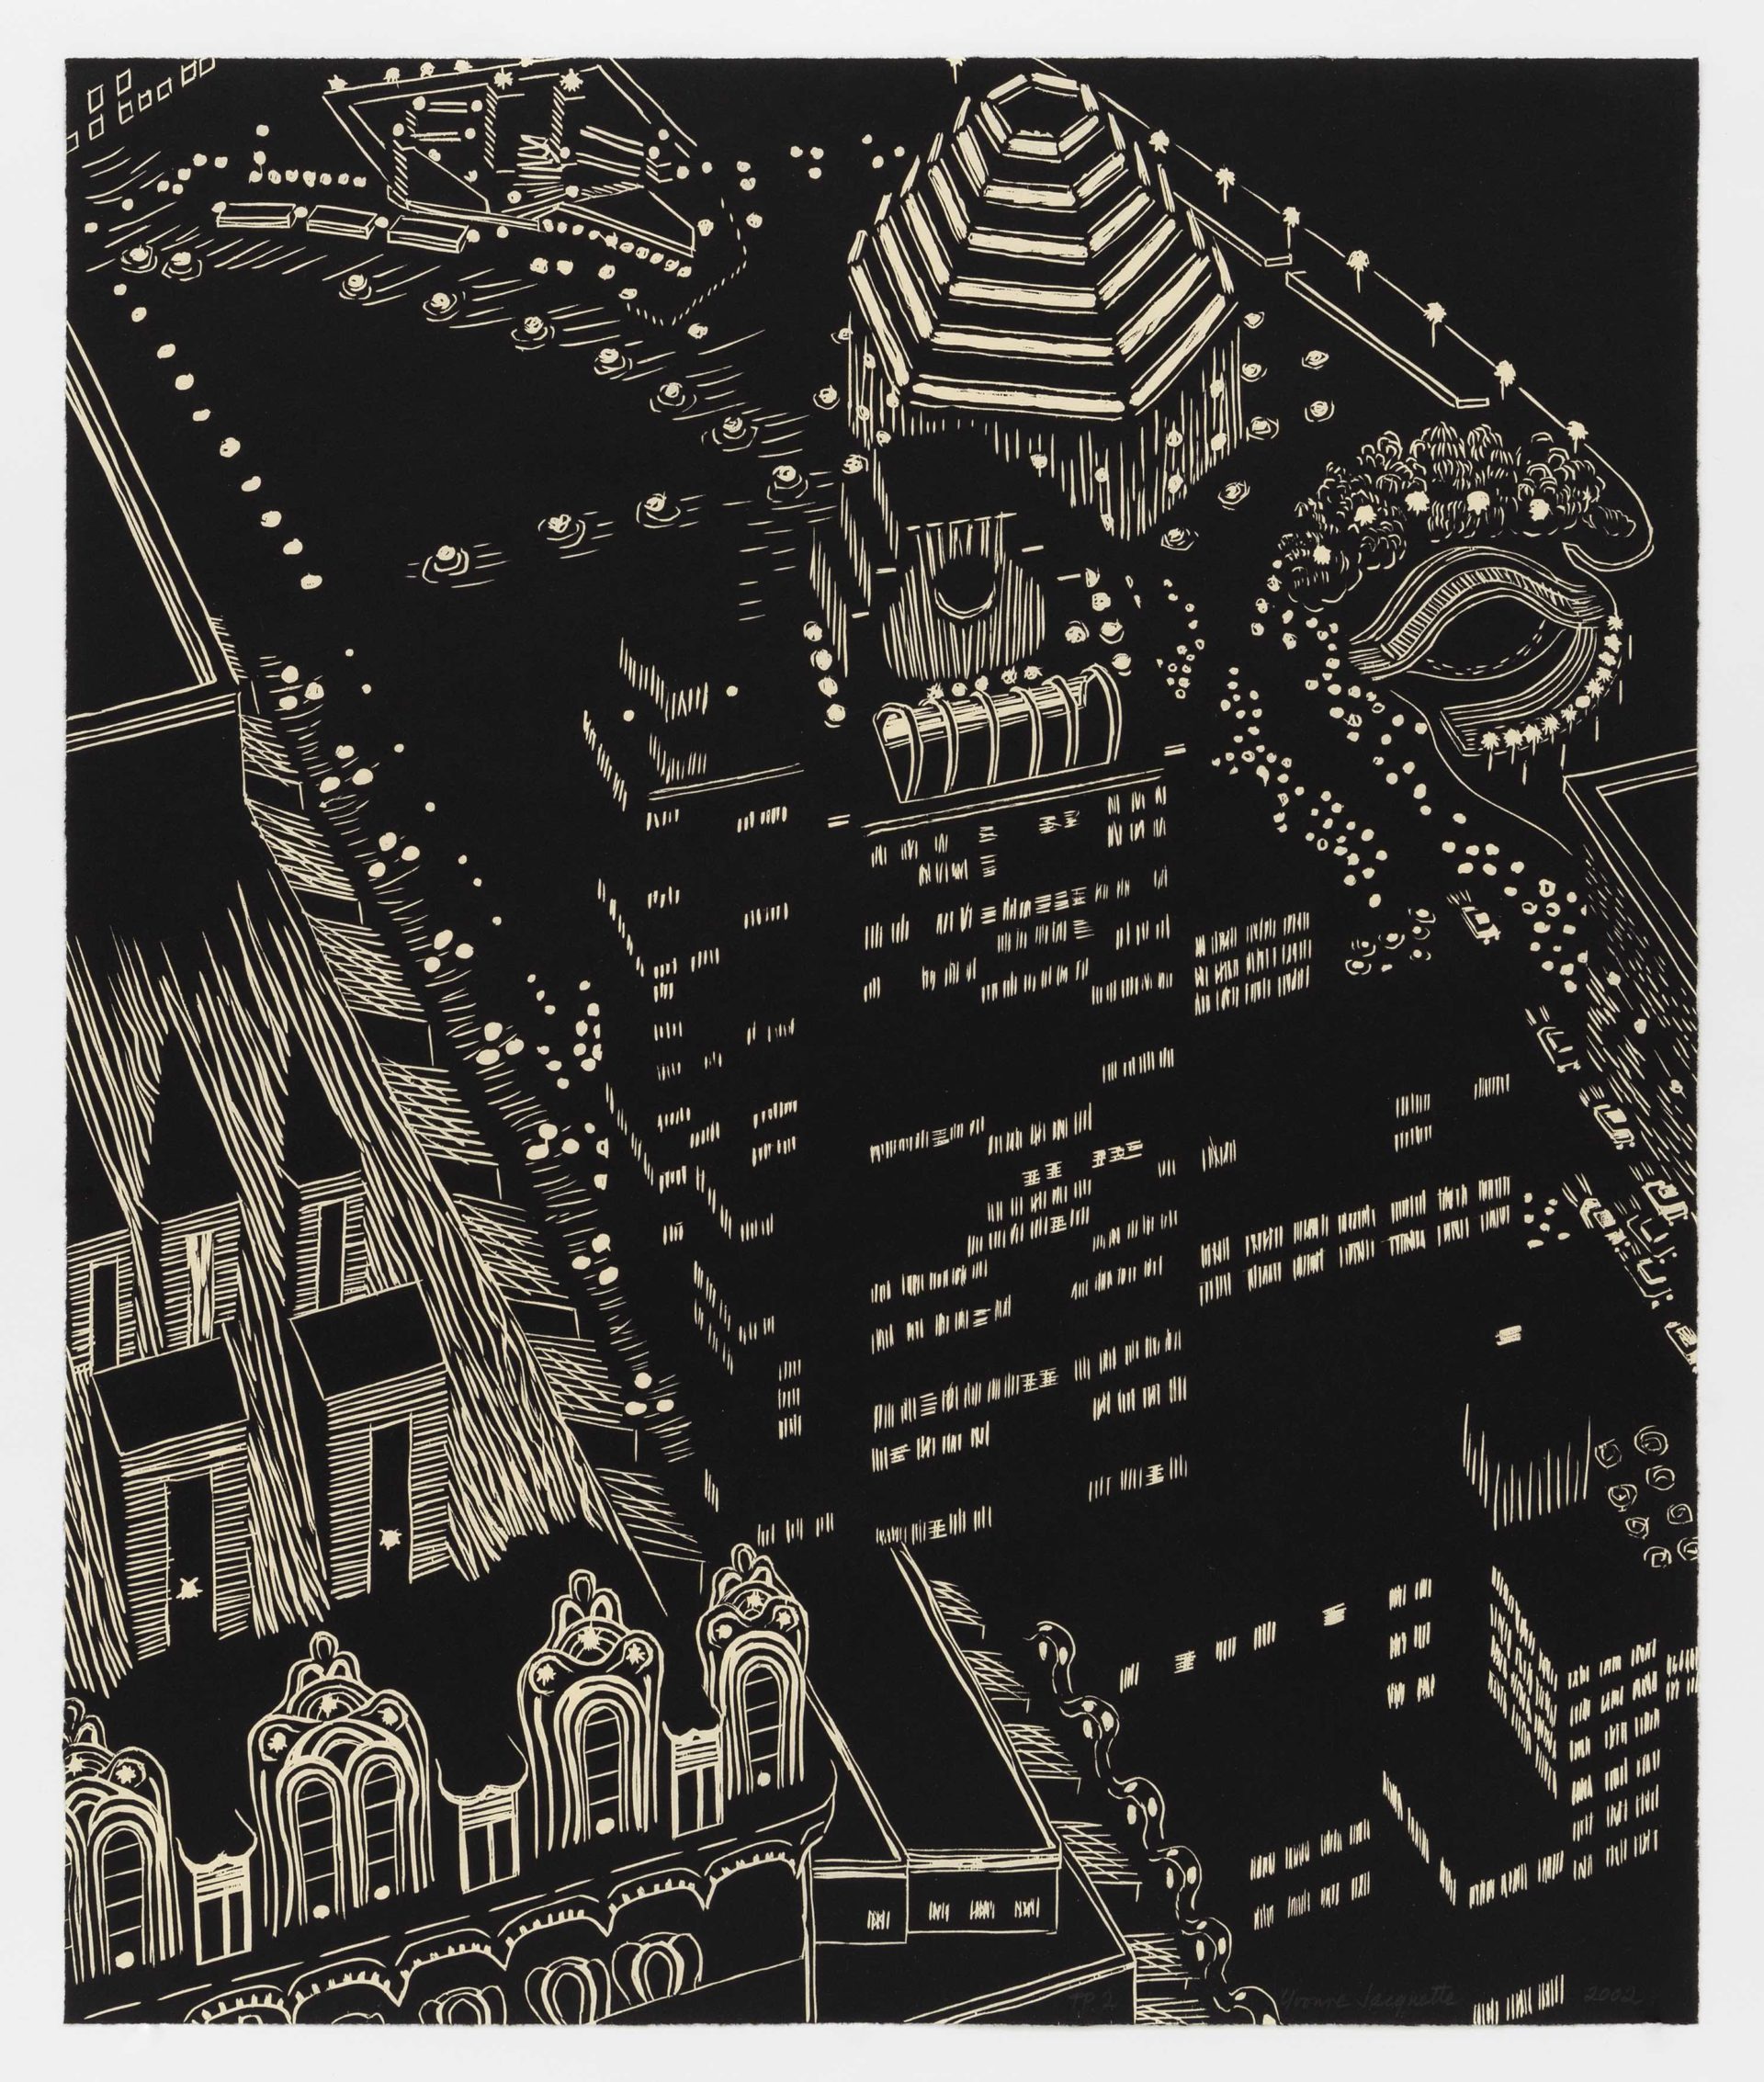 Mixed Heights, 2002, Woodcut, 23 1/2 x 19 1/2 inches (59.7 x 49.5 cm), Edition of 30